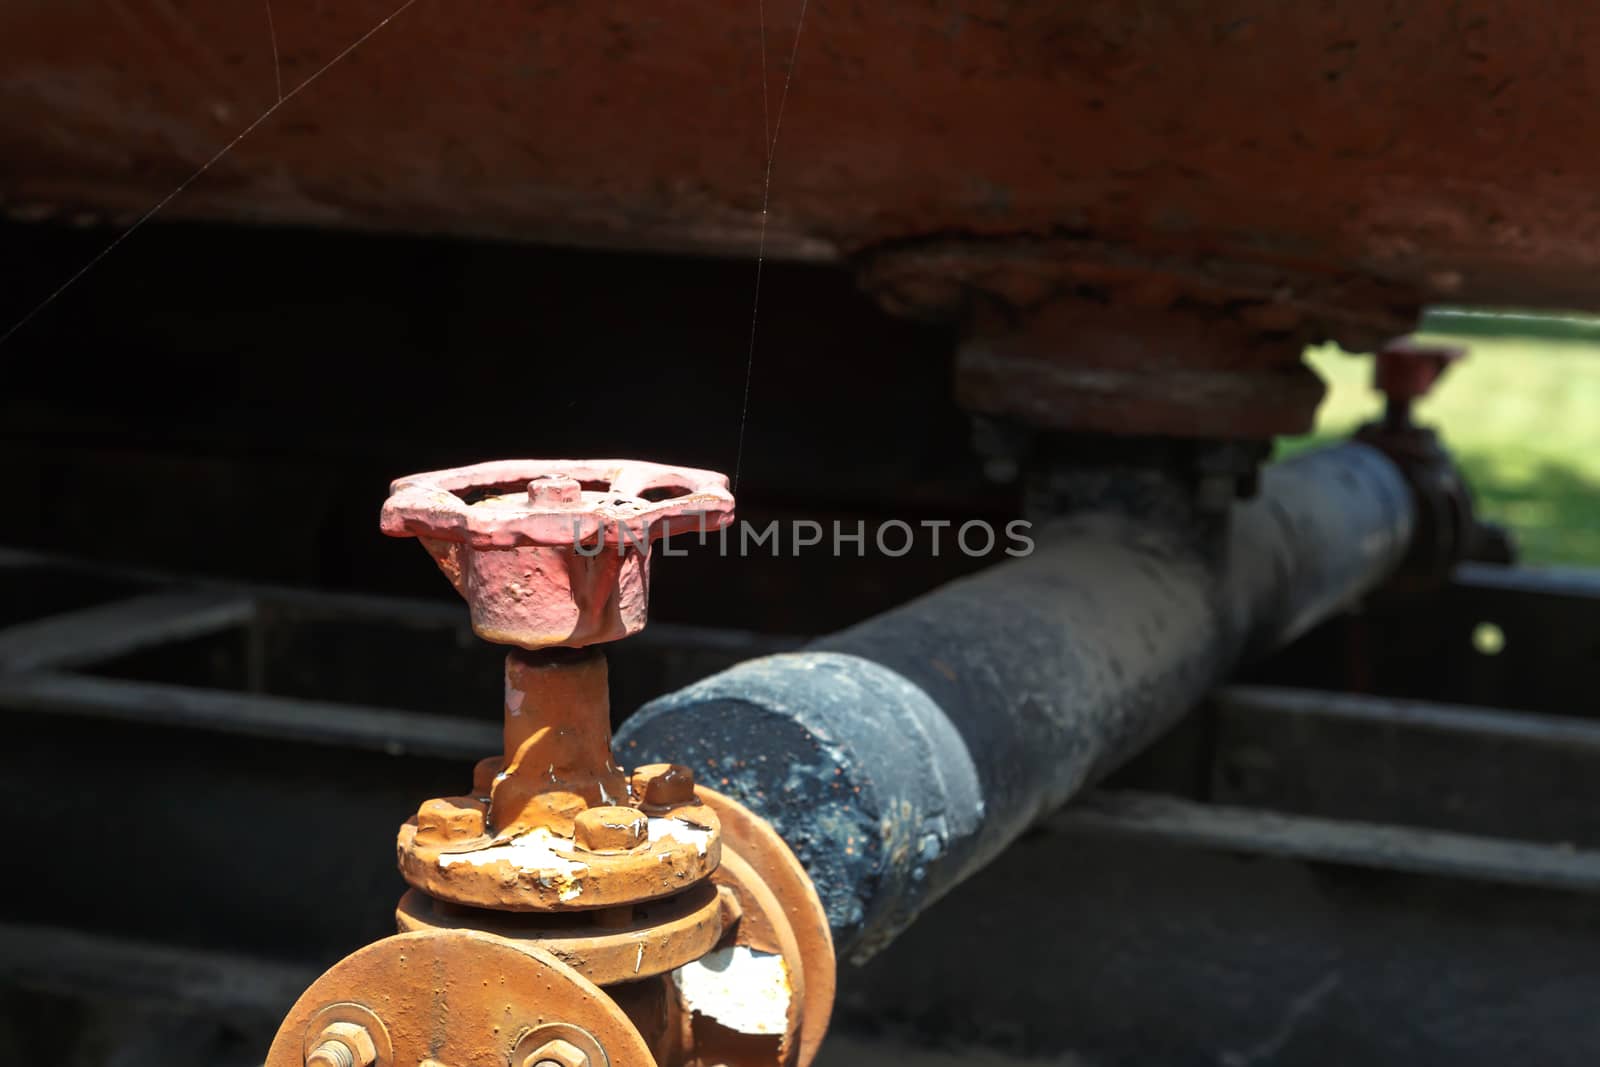 Industrial Valve and Cable by niglaynike